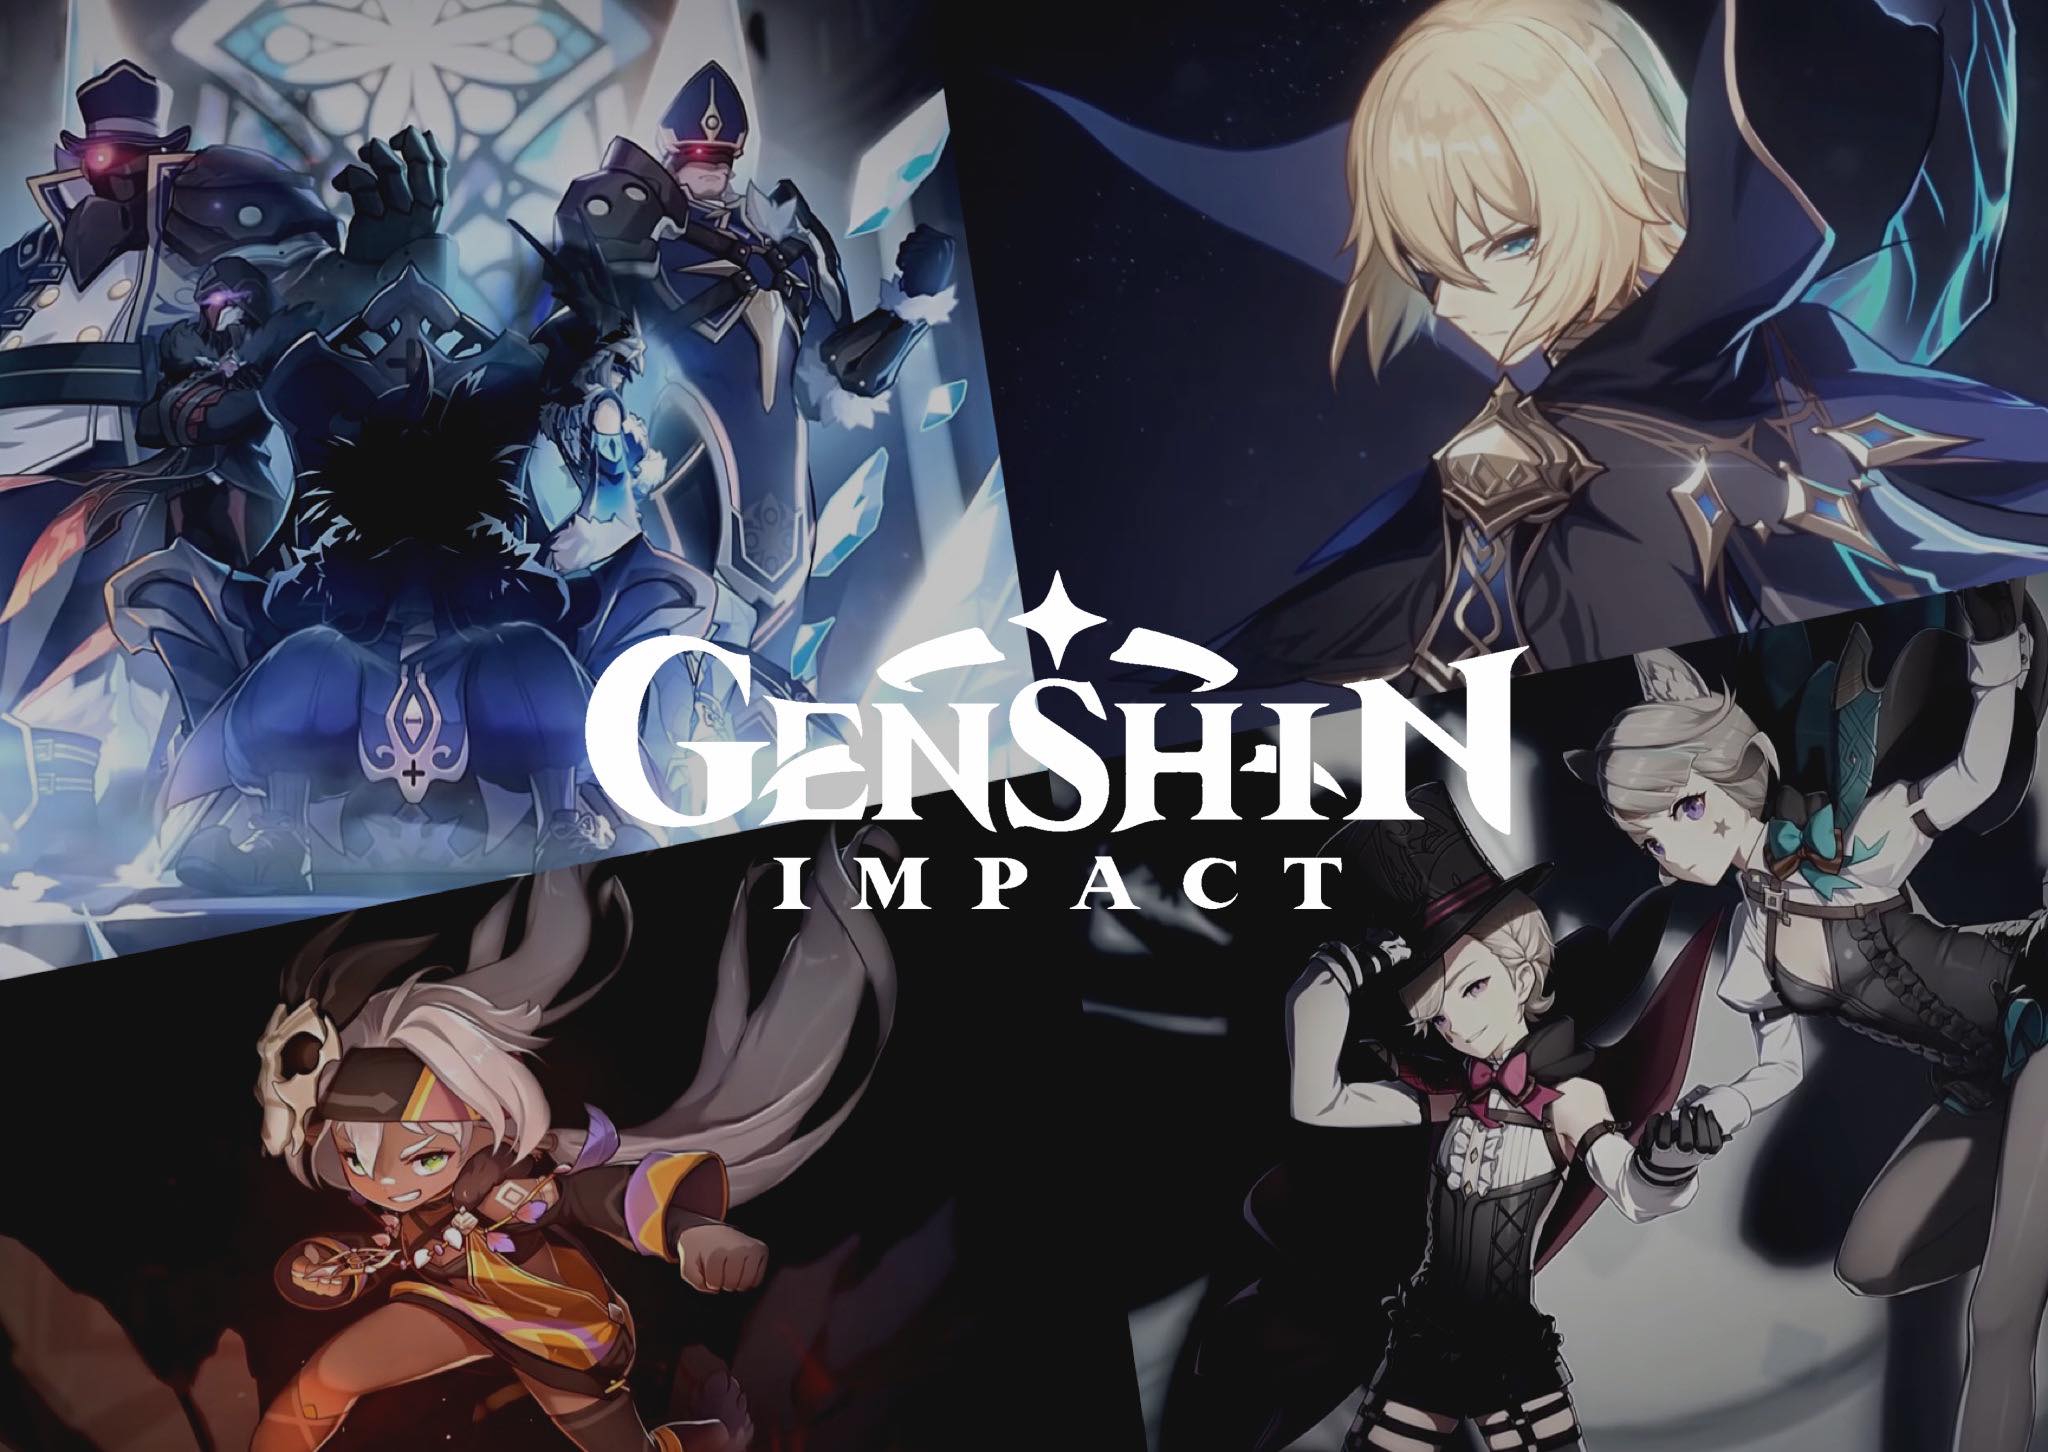 Final Weapon on X: Genshin Impact version 3.4 update launches